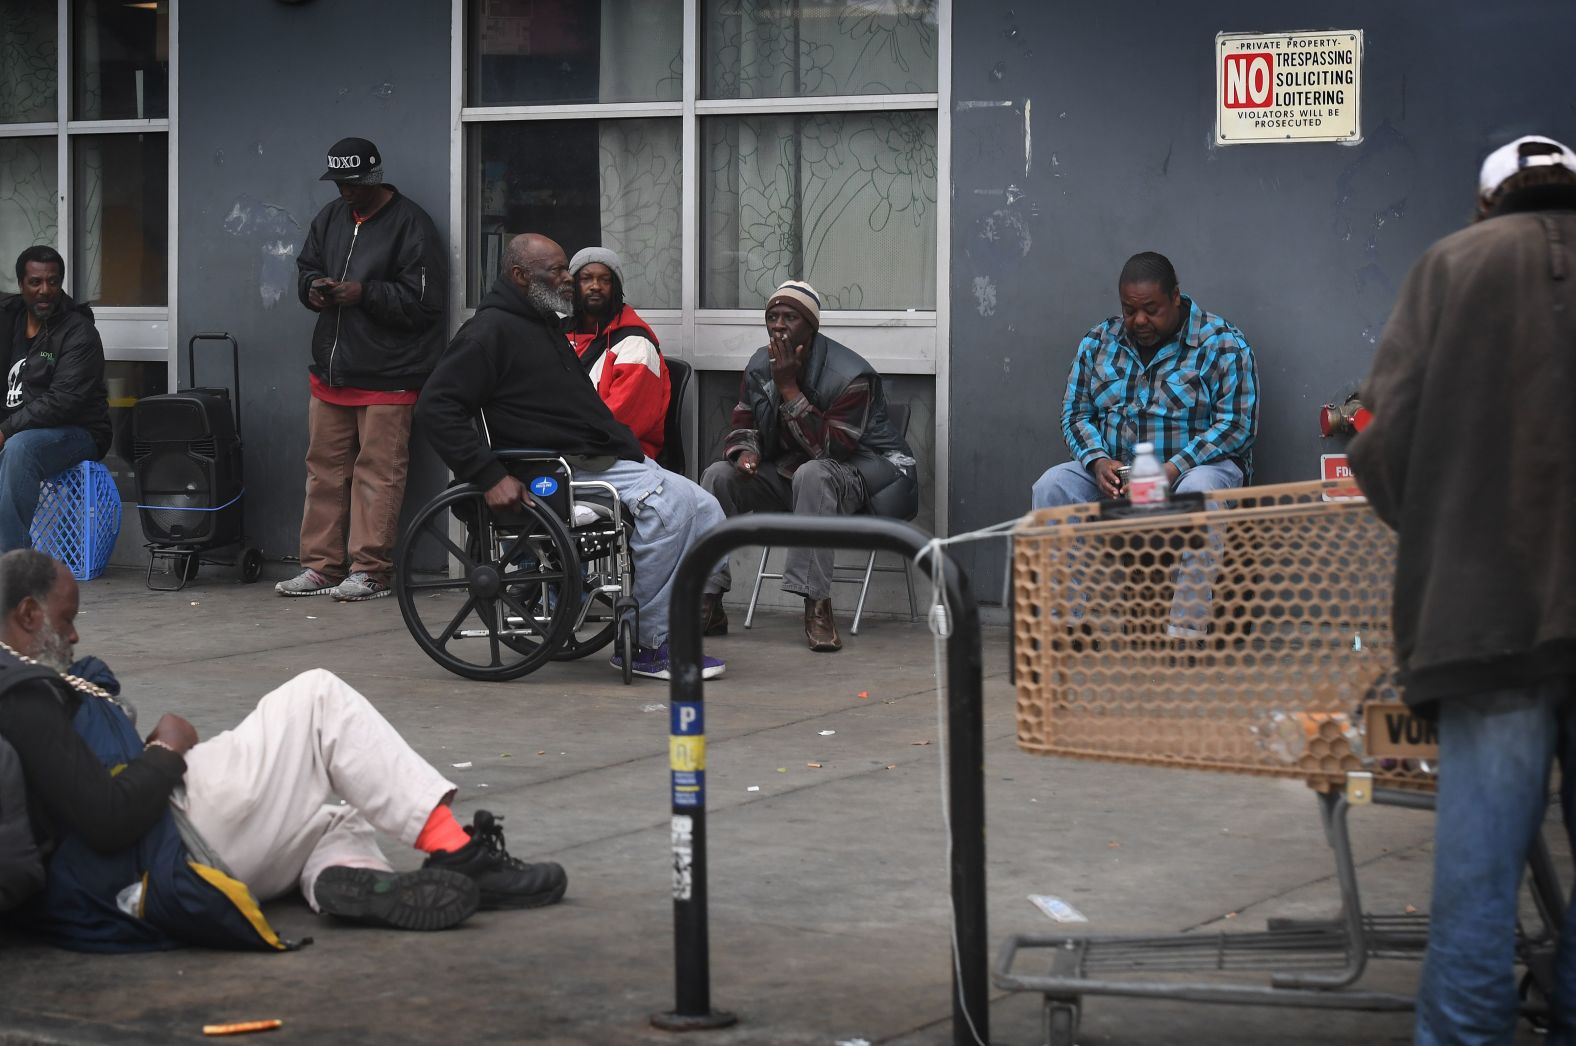 Homeless people gather on the streets of Skid Row near downtown Los Angeles on March 1. A lack of affordable housing in the city is the primary factor driving the spike in homelessness, according to Mayor Eric Garcetti.